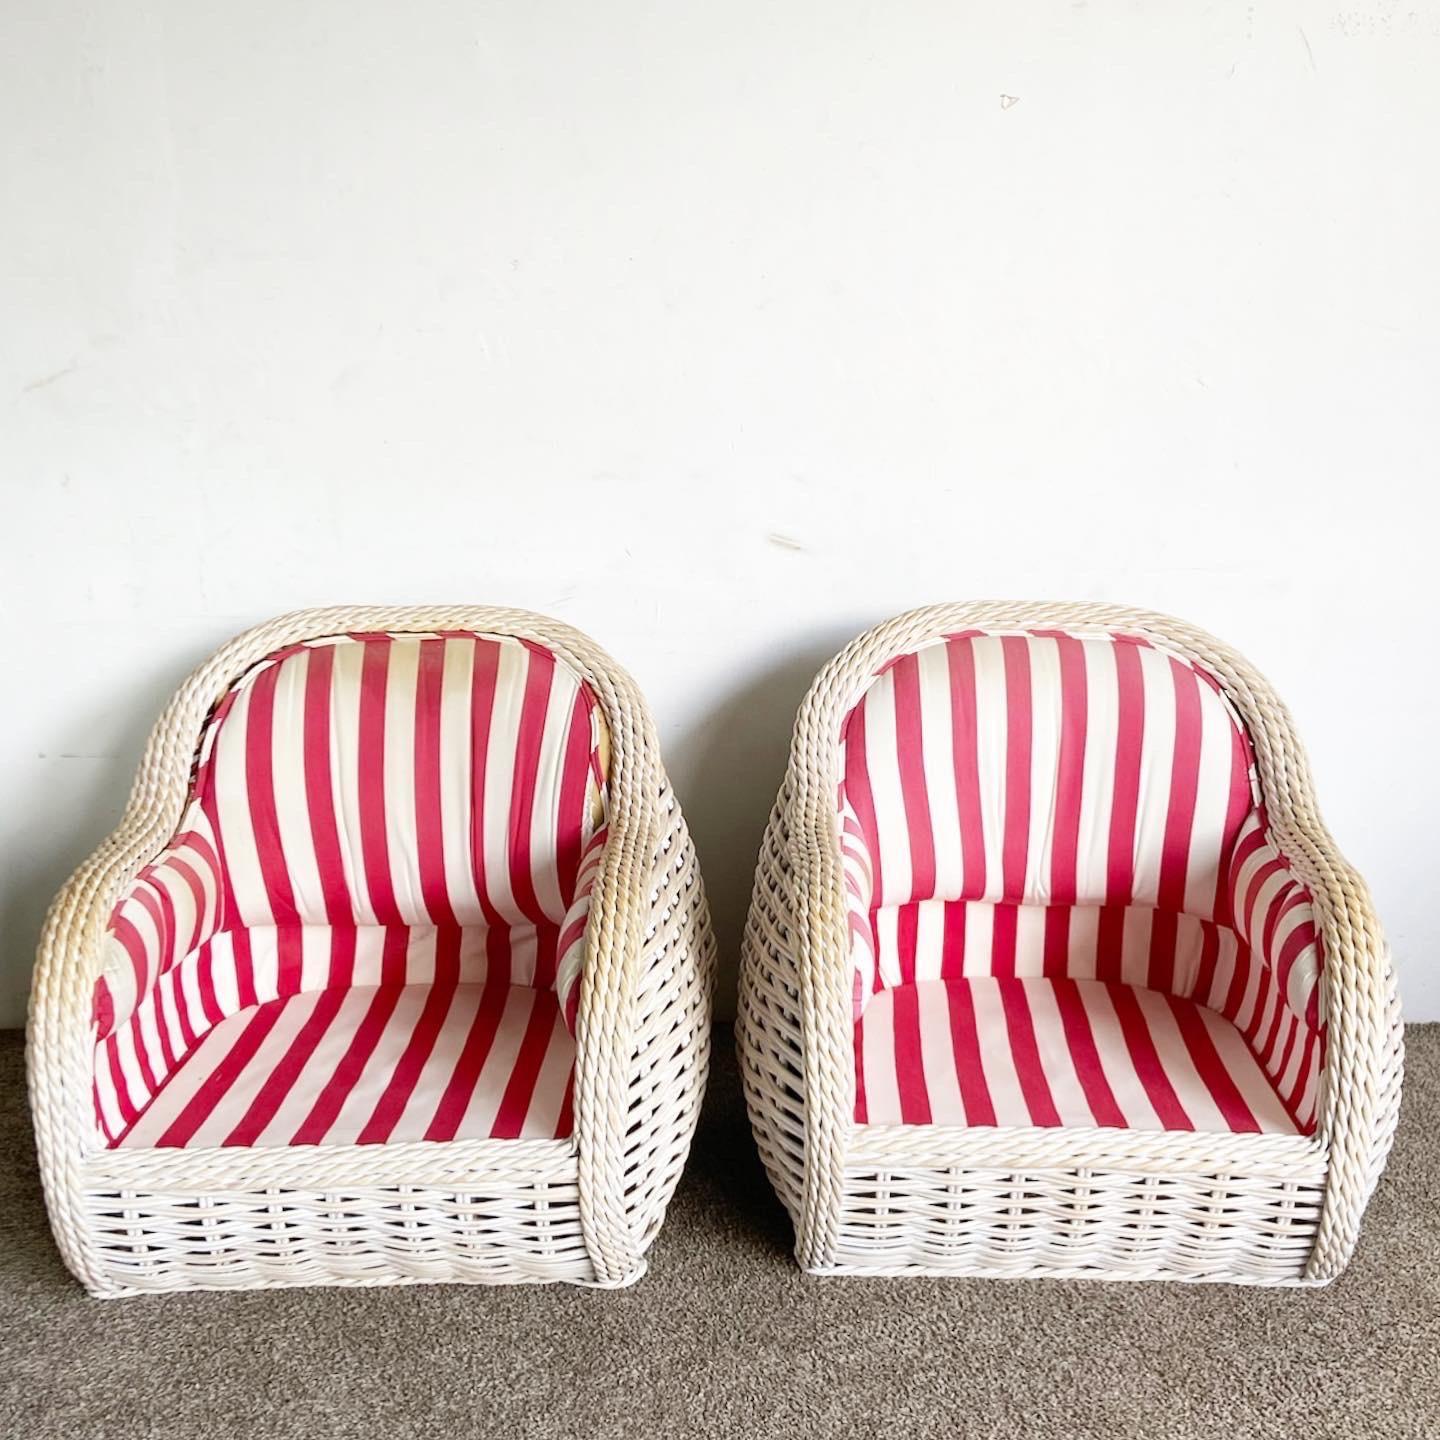 Bohemian Boho Chic Woven Wicker Bulbous Lounge Chairs - a Pair For Sale